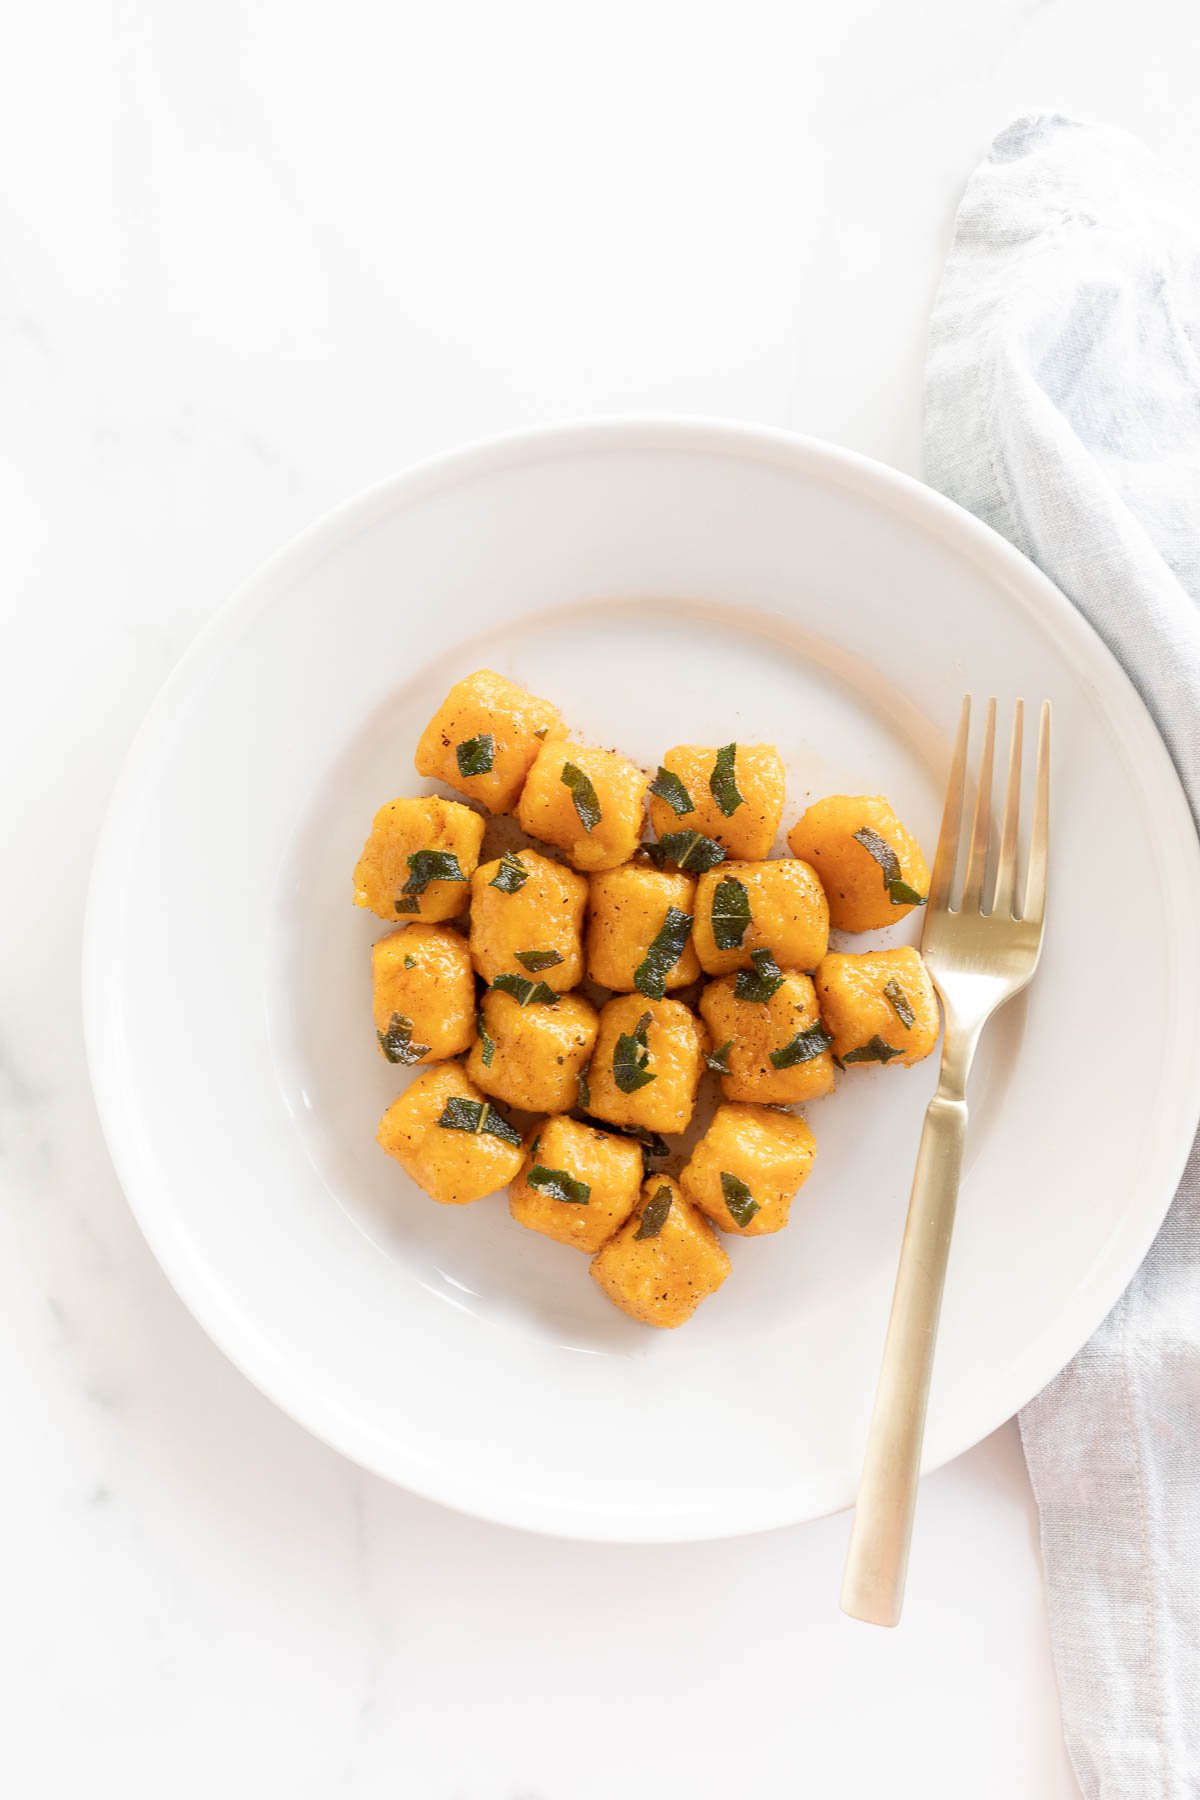 Sweet potato gnocchi beautifully presented on a white plate, delicately flattened with a fork.